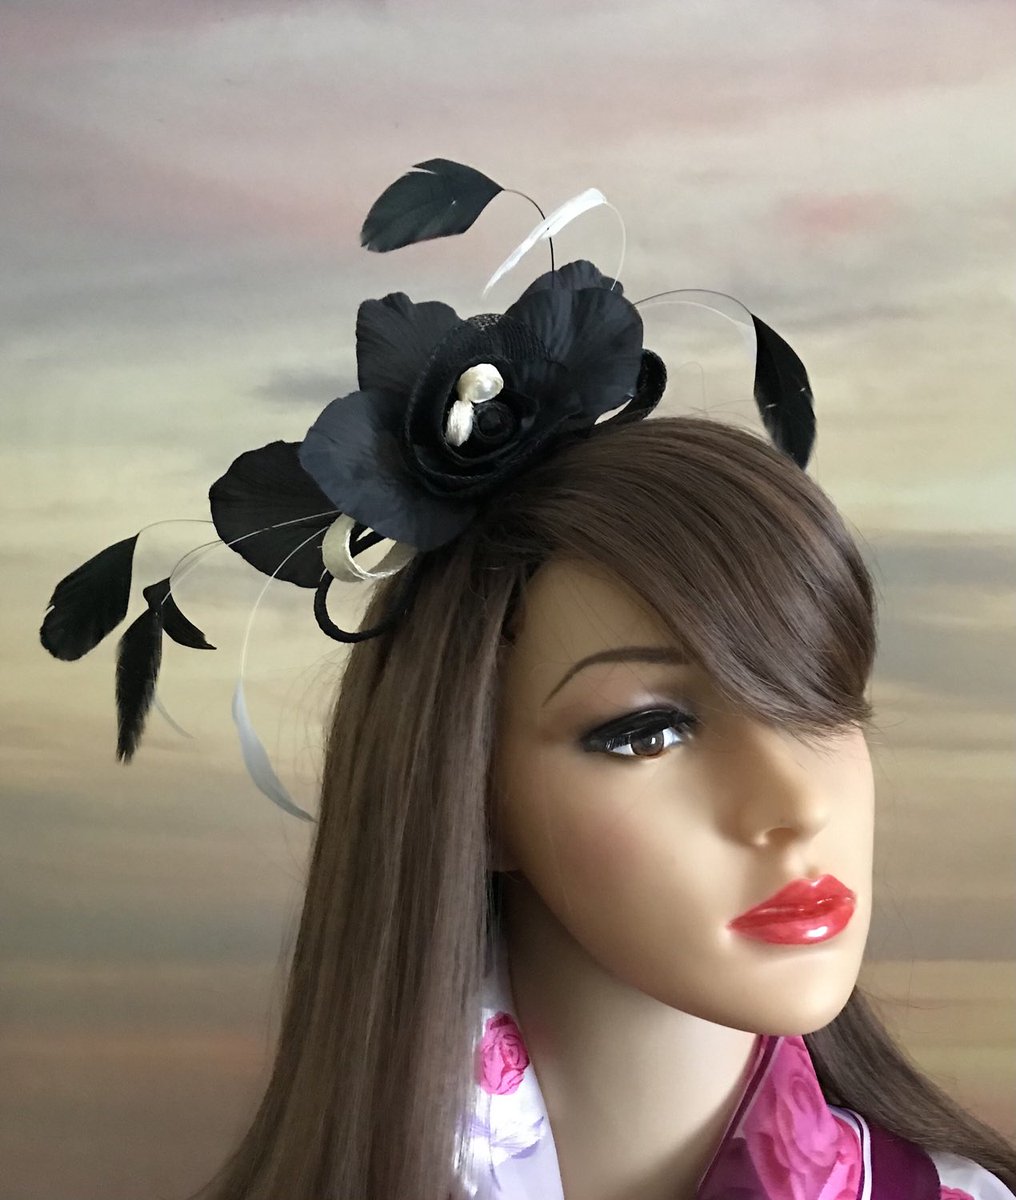 Excited to share this item from my #etsy shop: Black and stone fascinator with feathers on an Alice band summer / wedding / garden party / Derby #black #wedding #formalevent #fascinator #stone #fauxpearls #feathers #church #gardenparty etsy.me/3V6Jbop